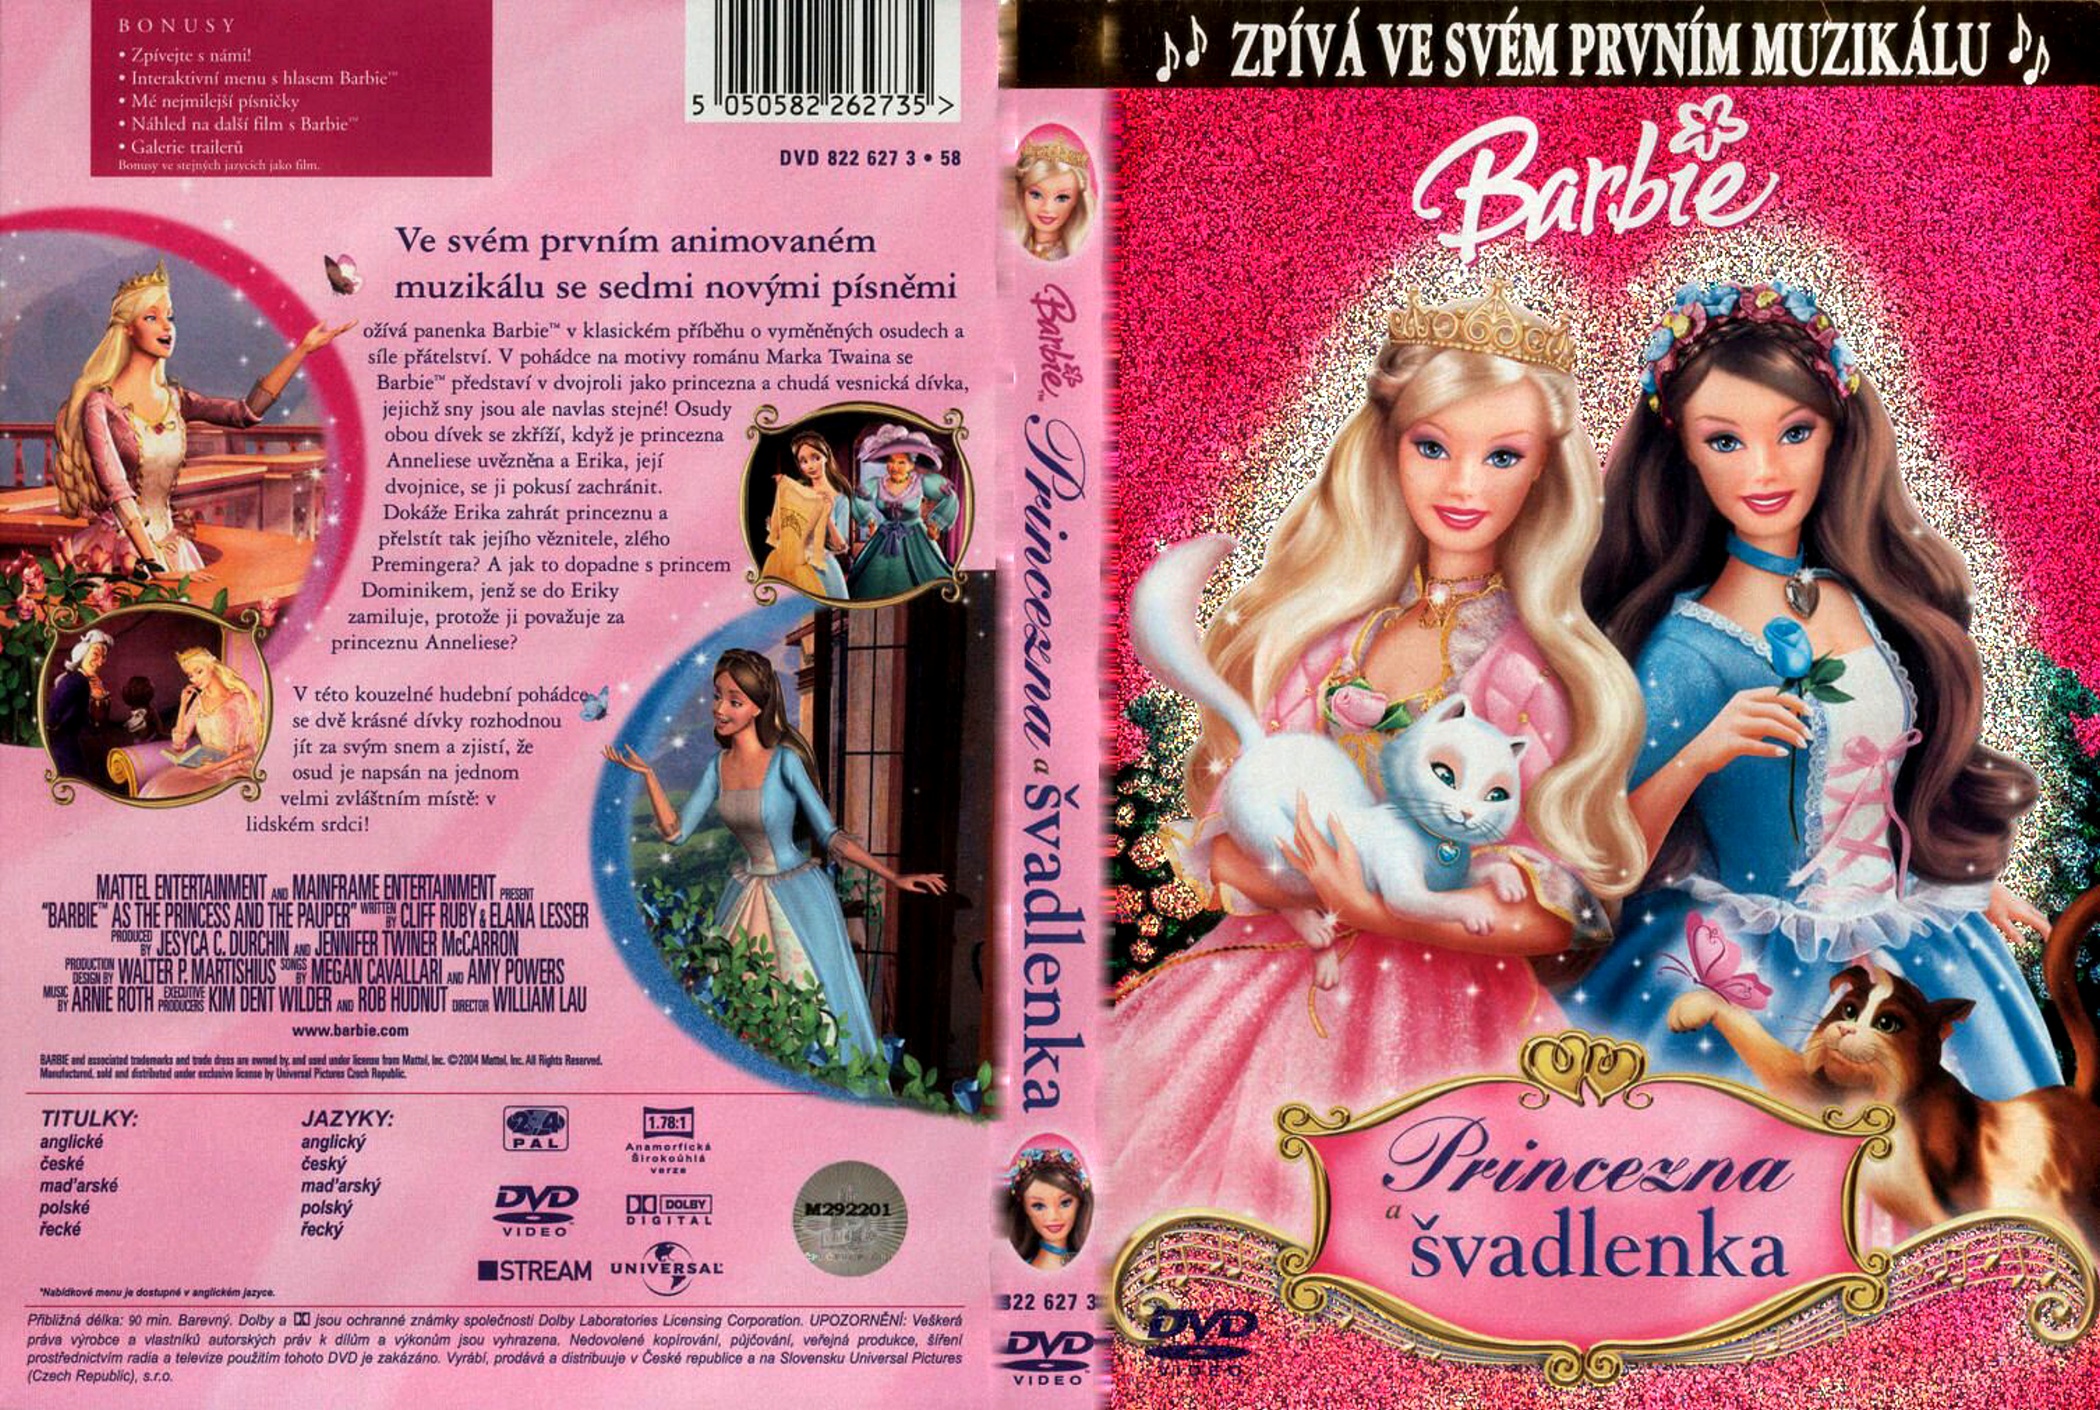 high quality DVD / Blueray / Movie. barbie princess and the pauper full m.....